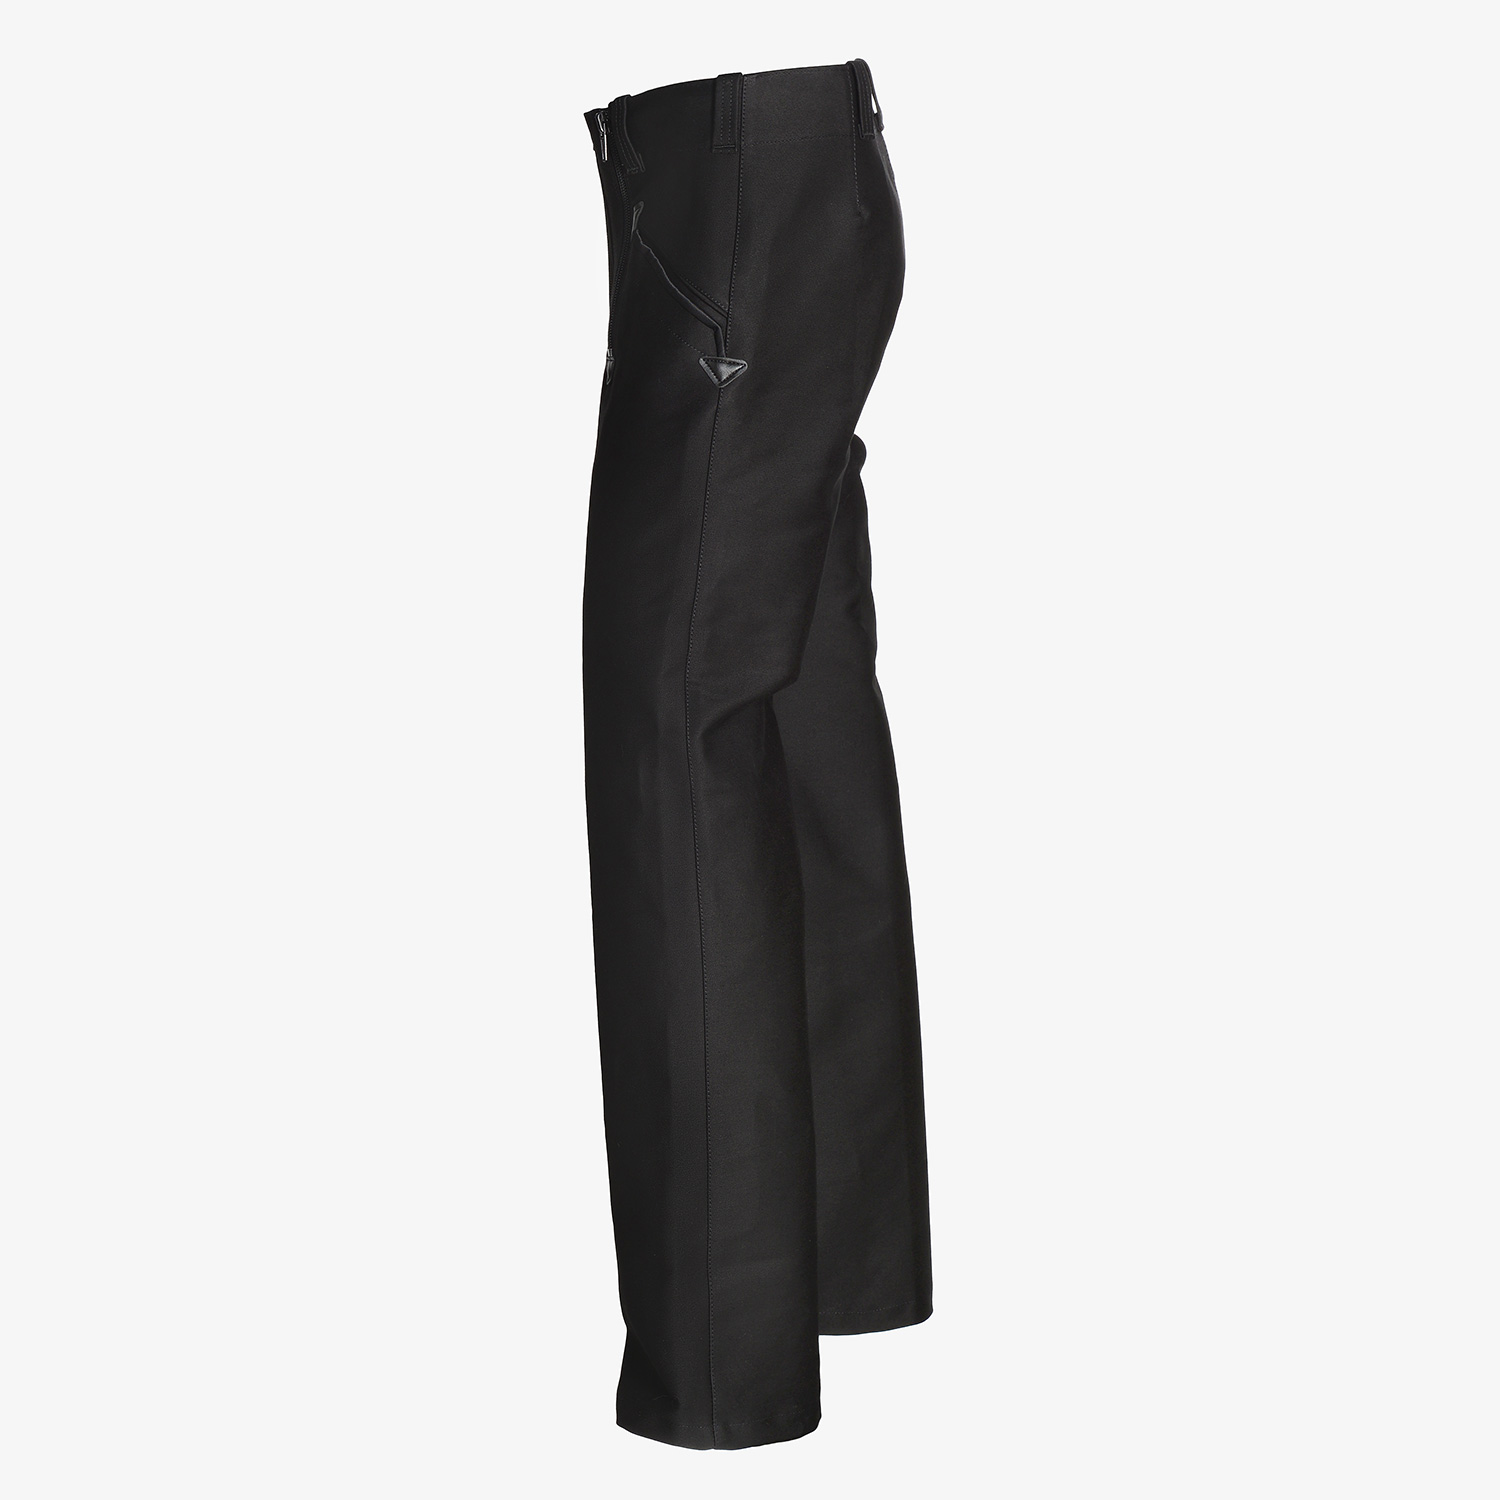 MARC guild trousers moleskin without bell bottom